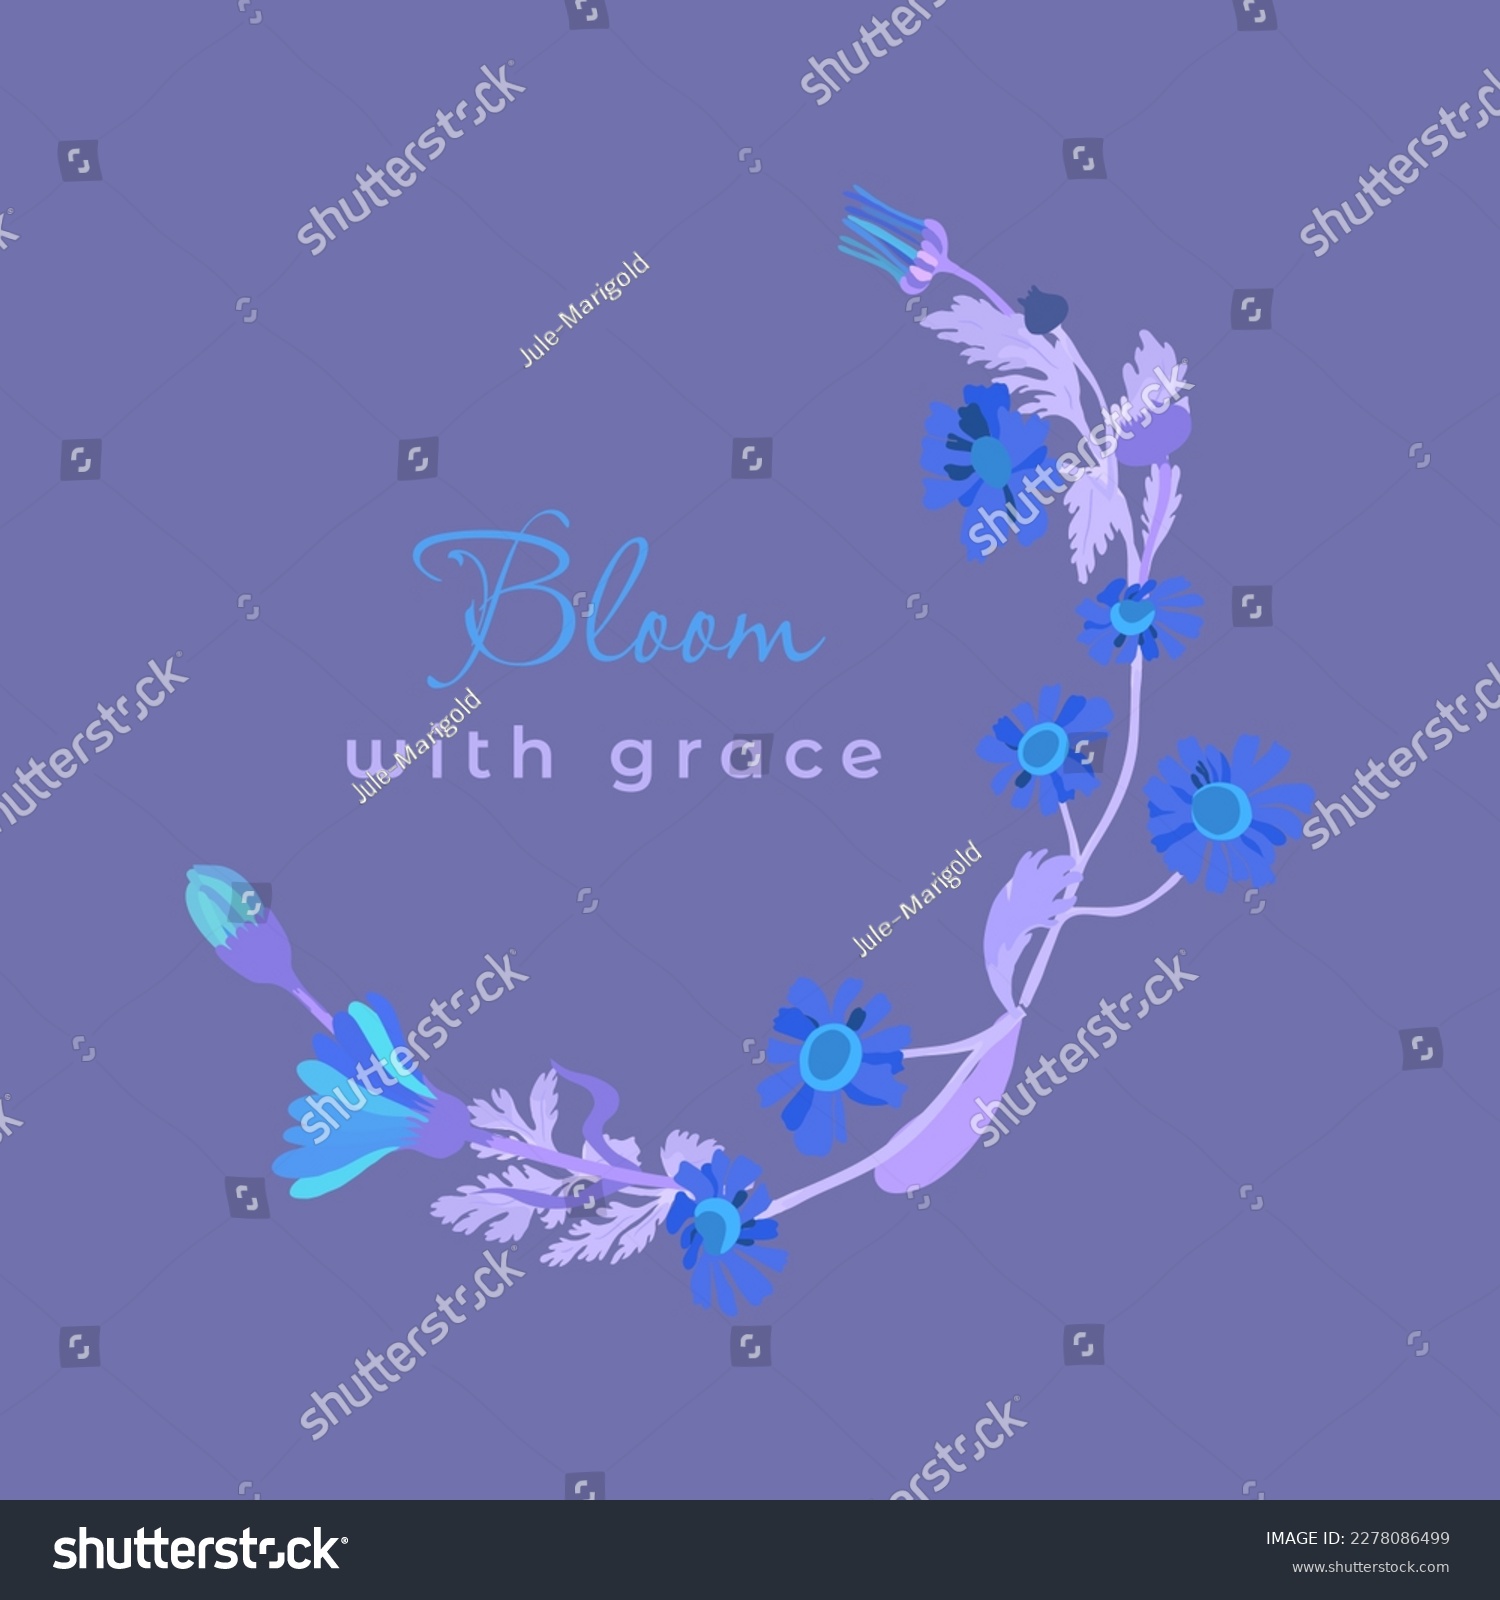 SVG of Isolated half-wreath with blue-lilac-turquoise-colored daisy flowers. Abstractly colored flower parts are isolated on a violet background. Words bloom with grace in the center. svg